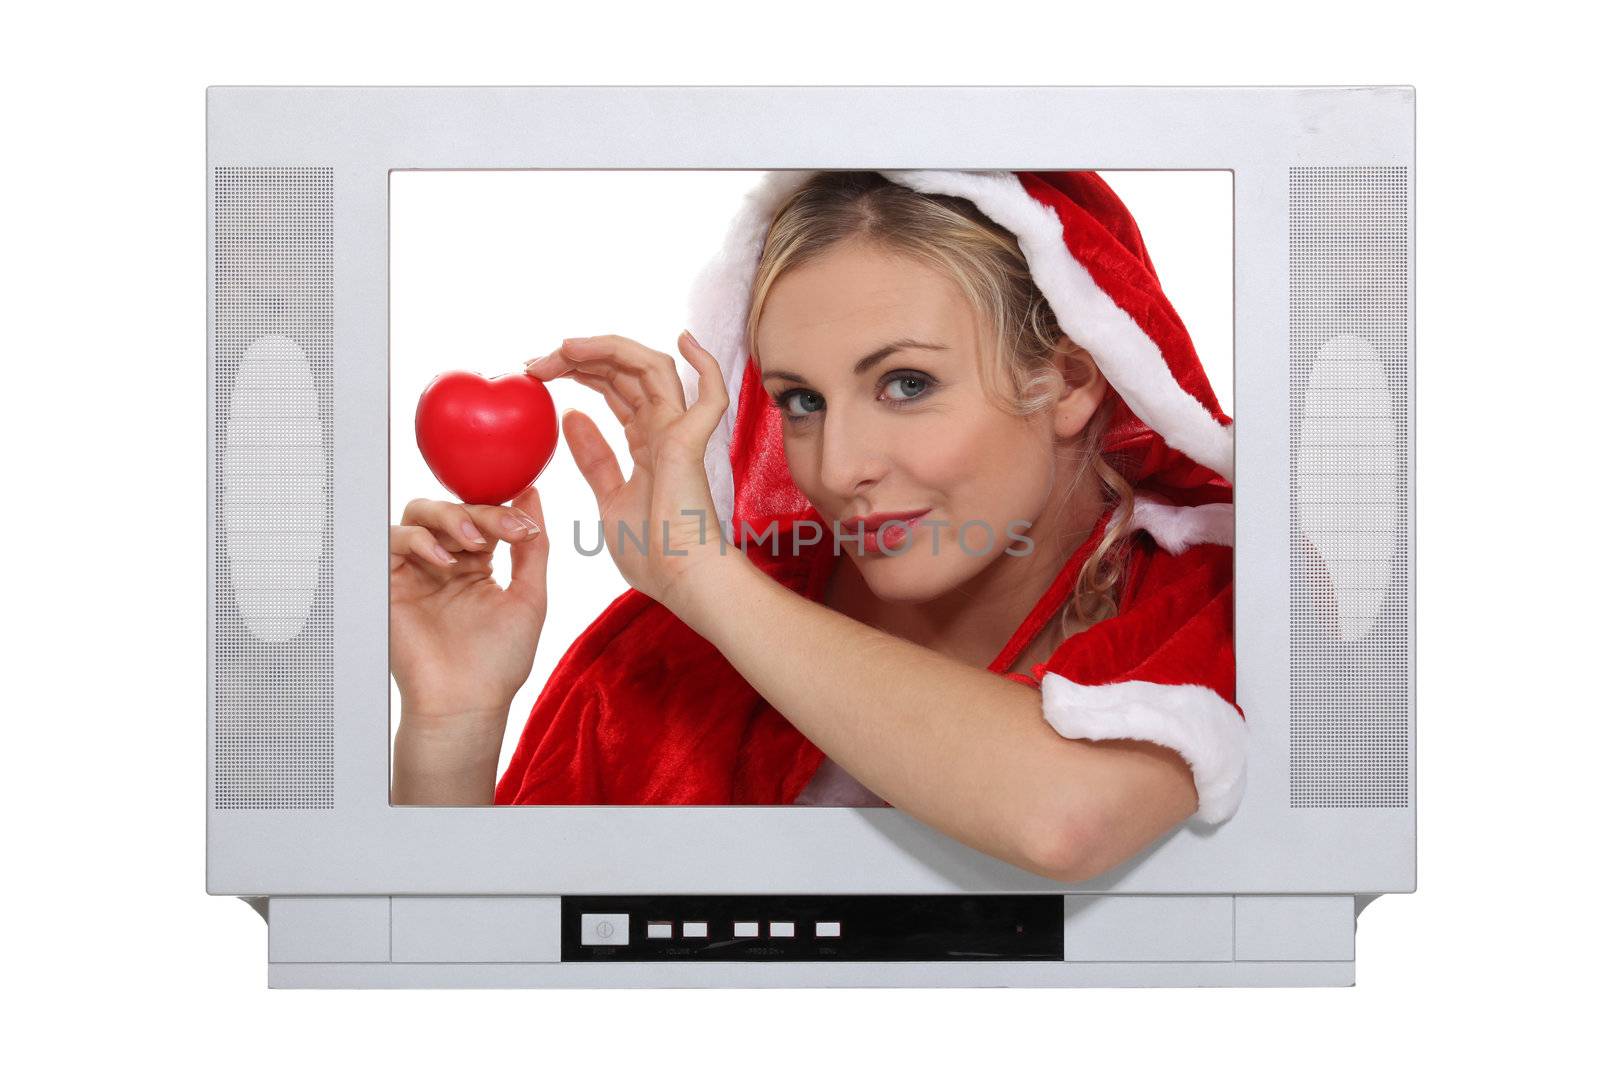 woman wearing a Christmas costume behind a TV screen